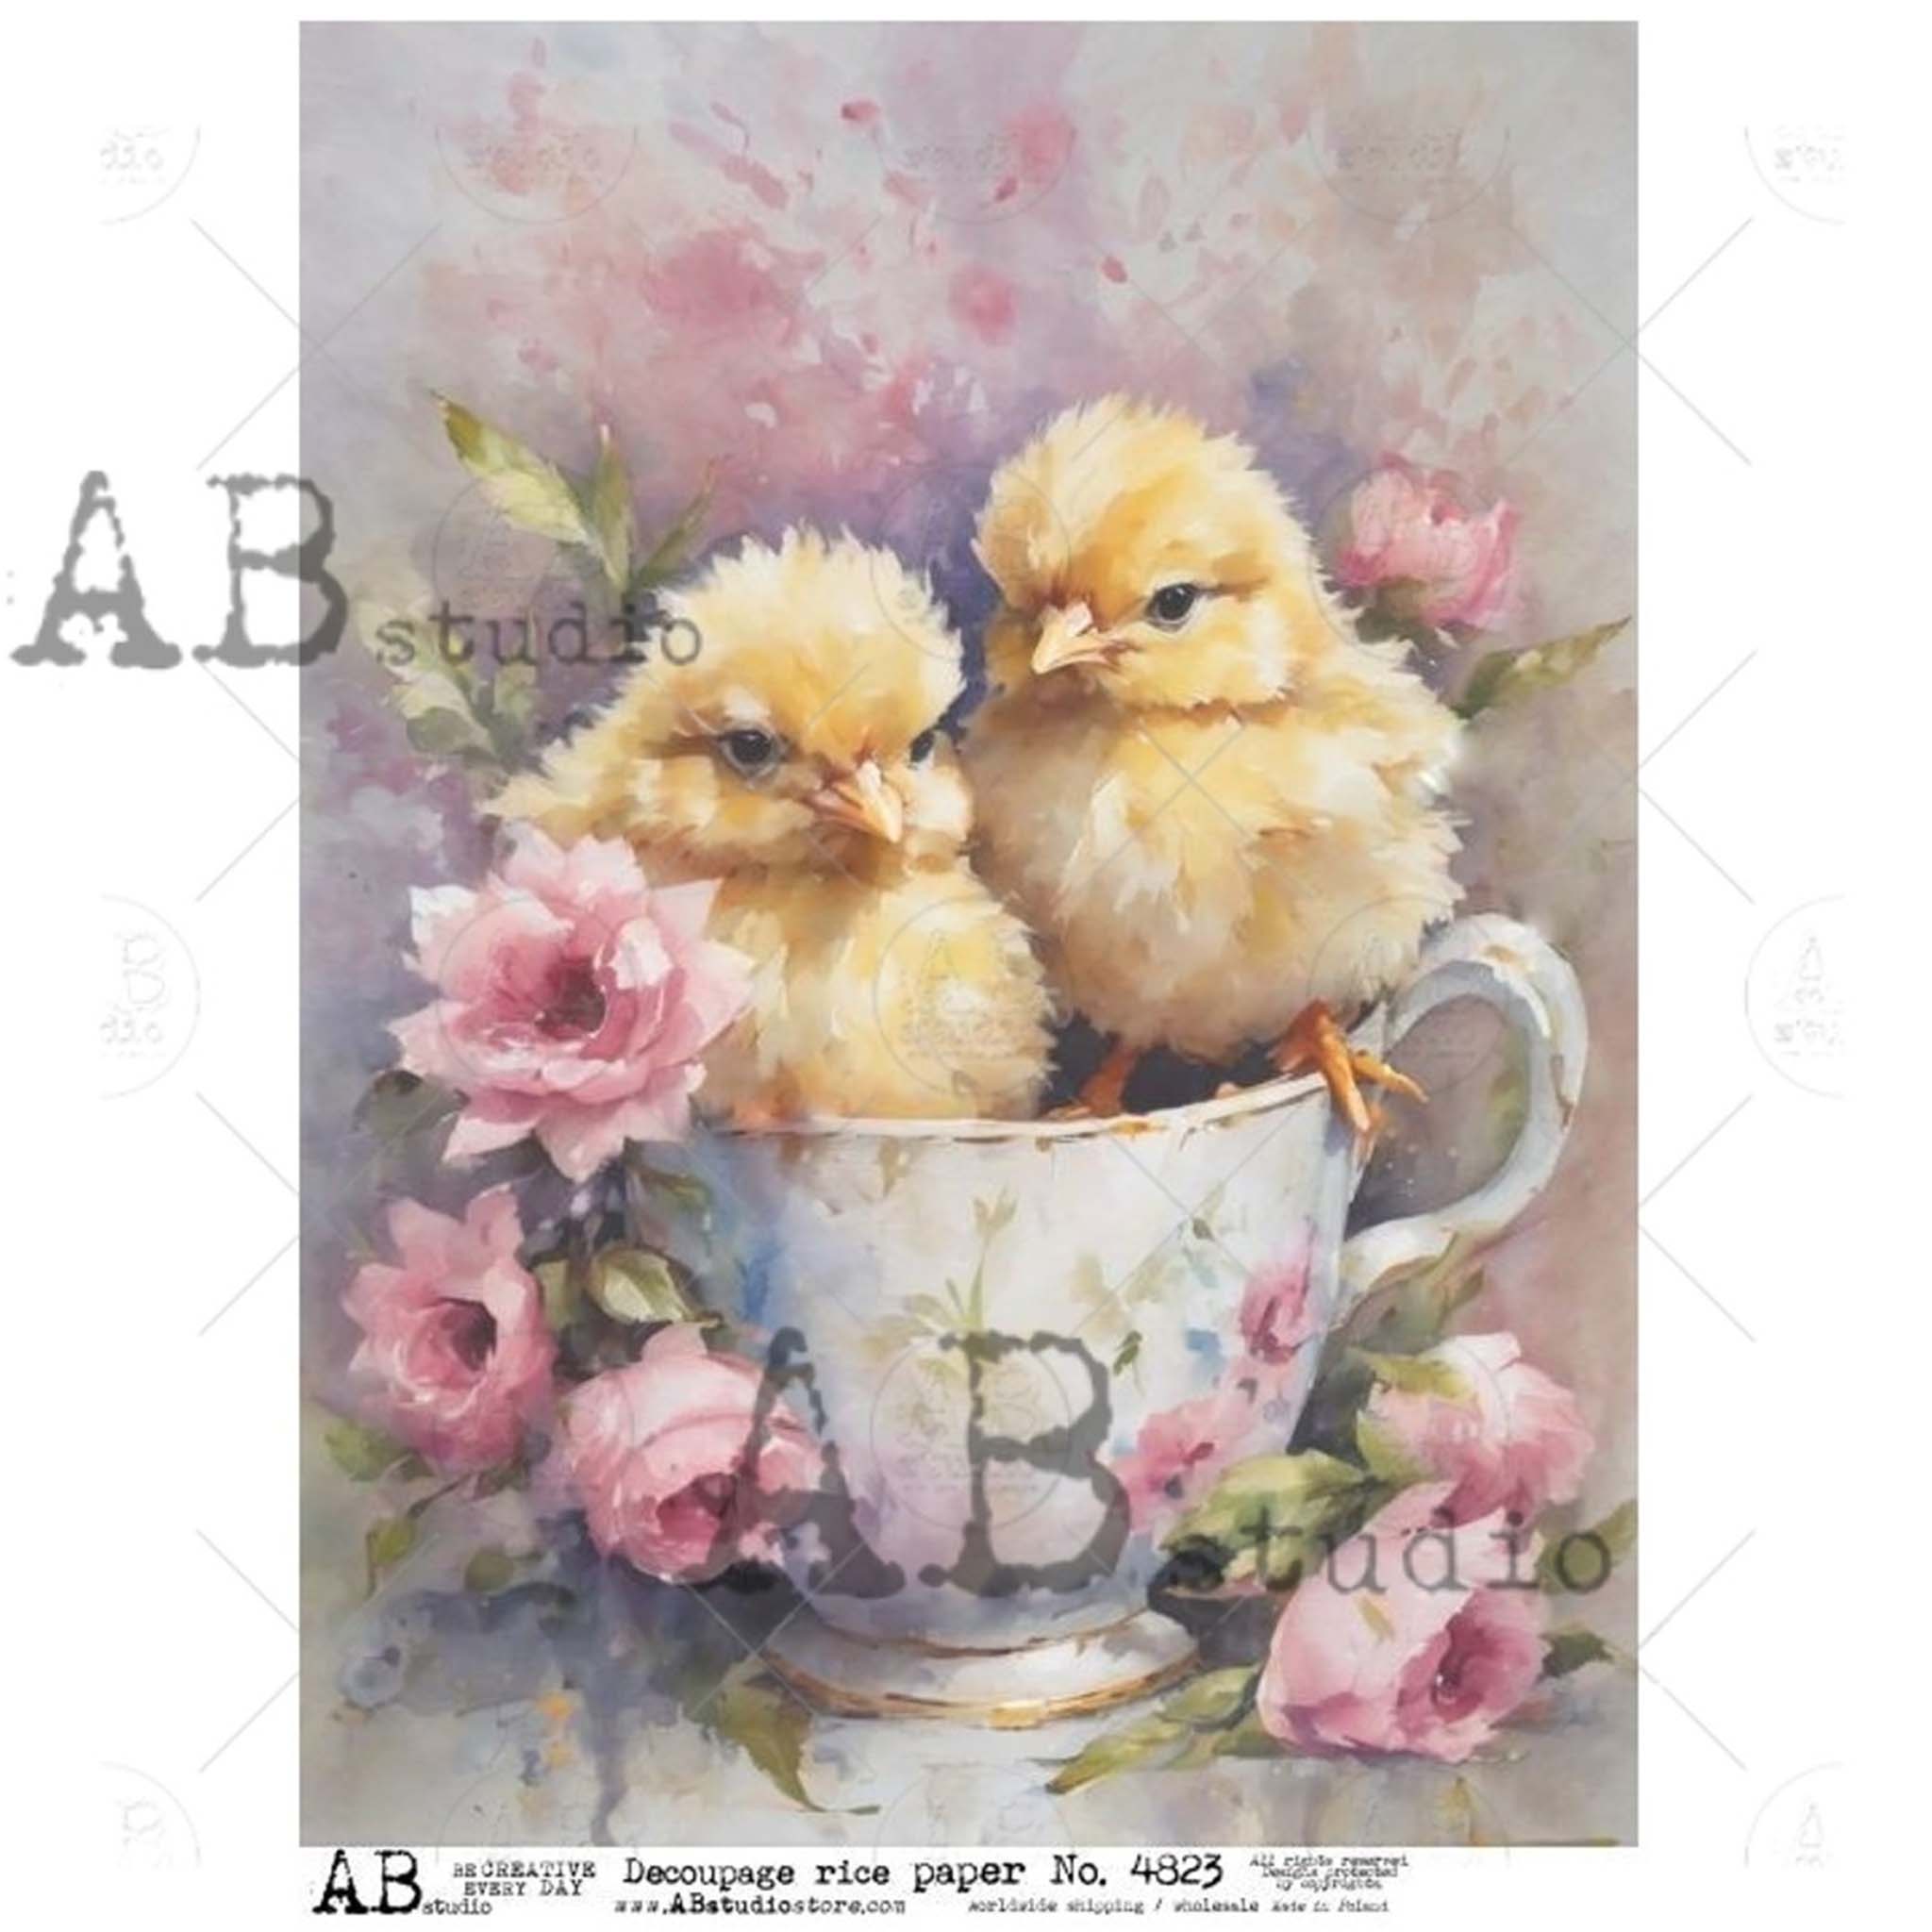 A4 rice paper design that features 2 cute yellow chicks nestled in a teacup, surrounded by sweet pink flowers and are against a white background.